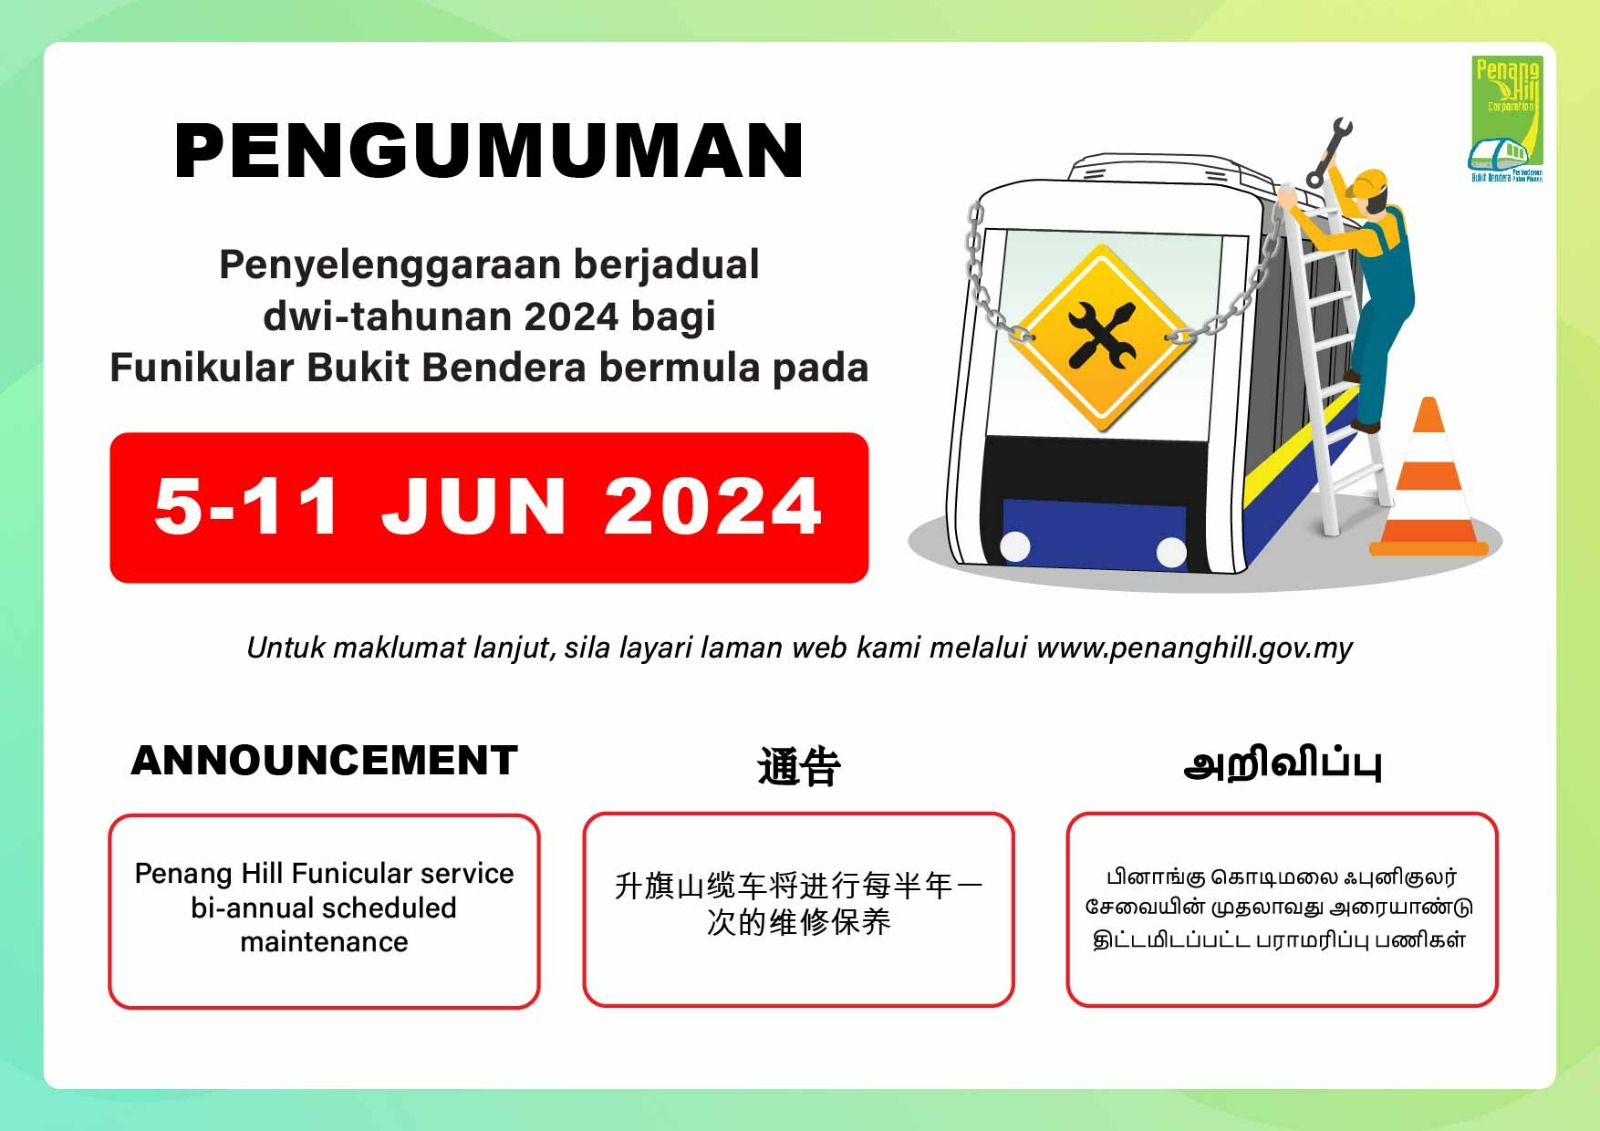 Penang Hill Funicular Service Second Bi-Annual Scheduled Maintenance From 5 – 11 June 2024